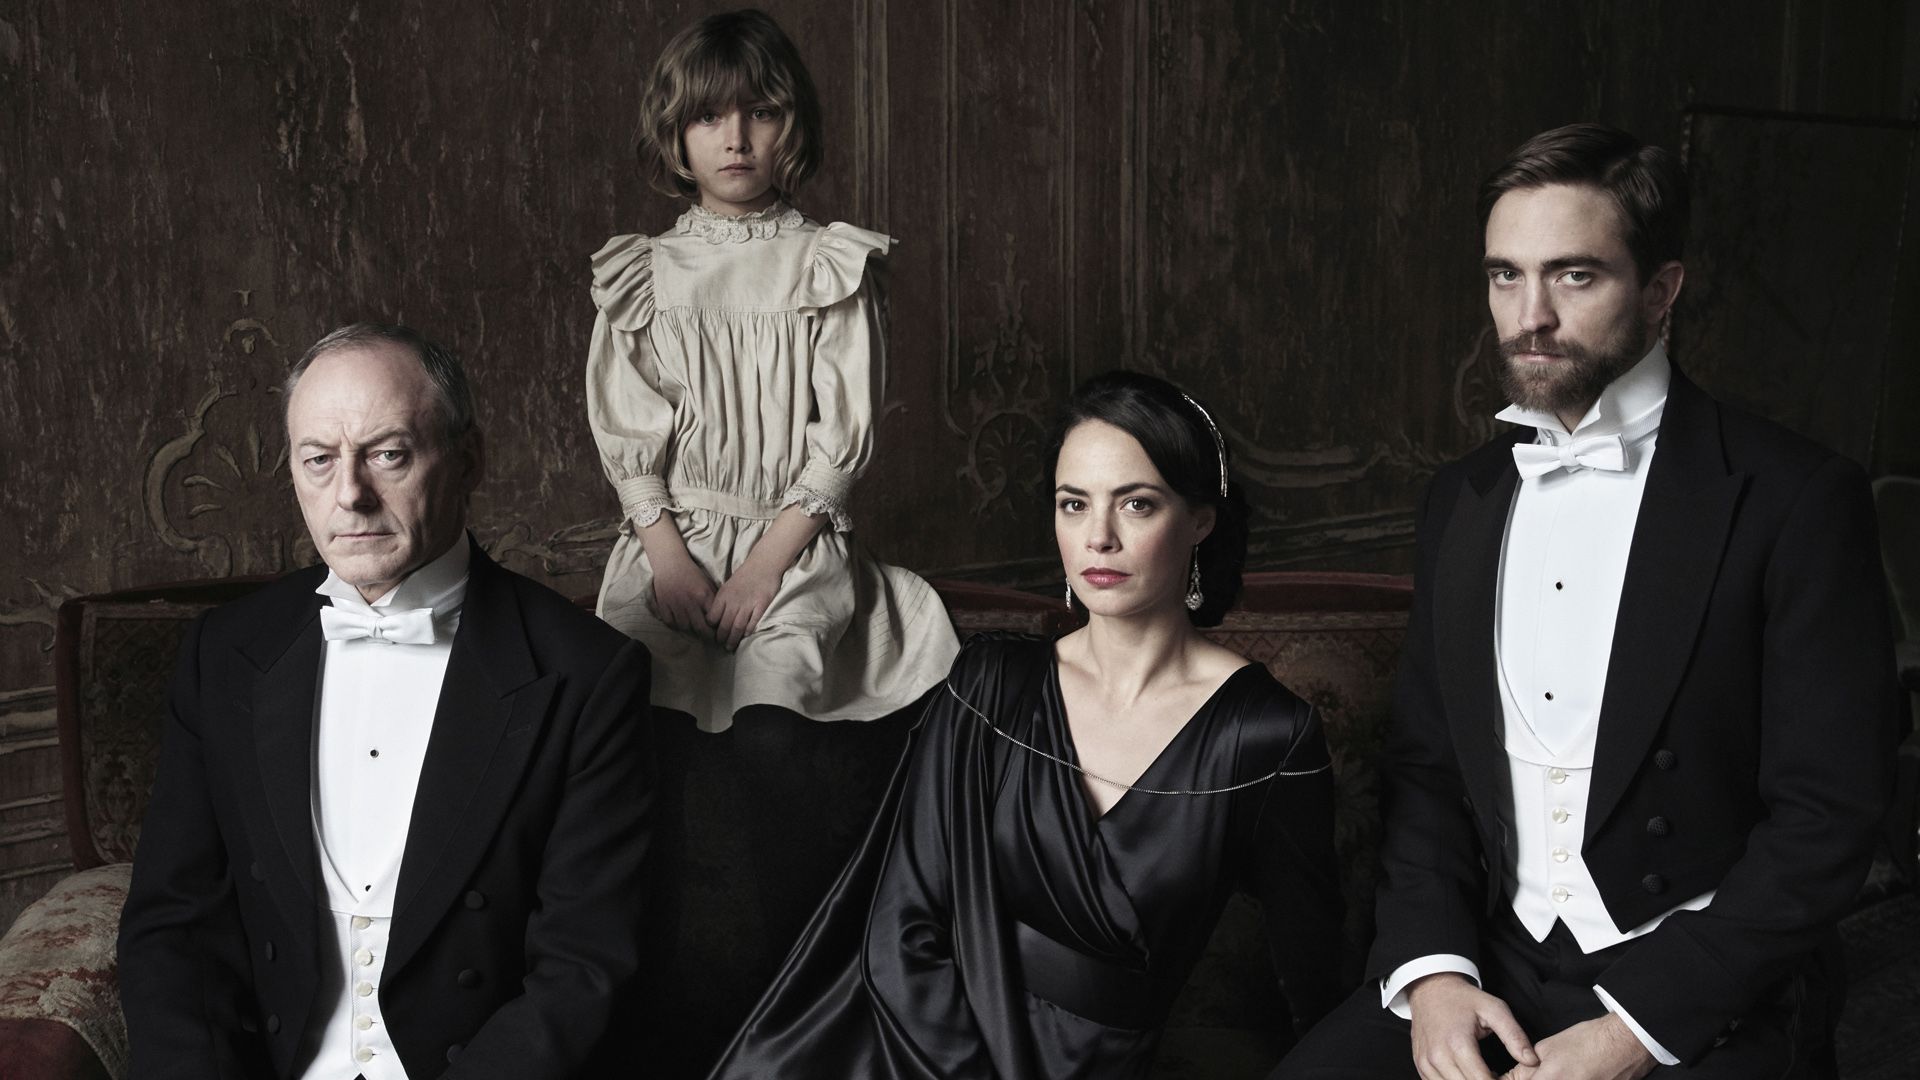 The Childhood of a Leader background